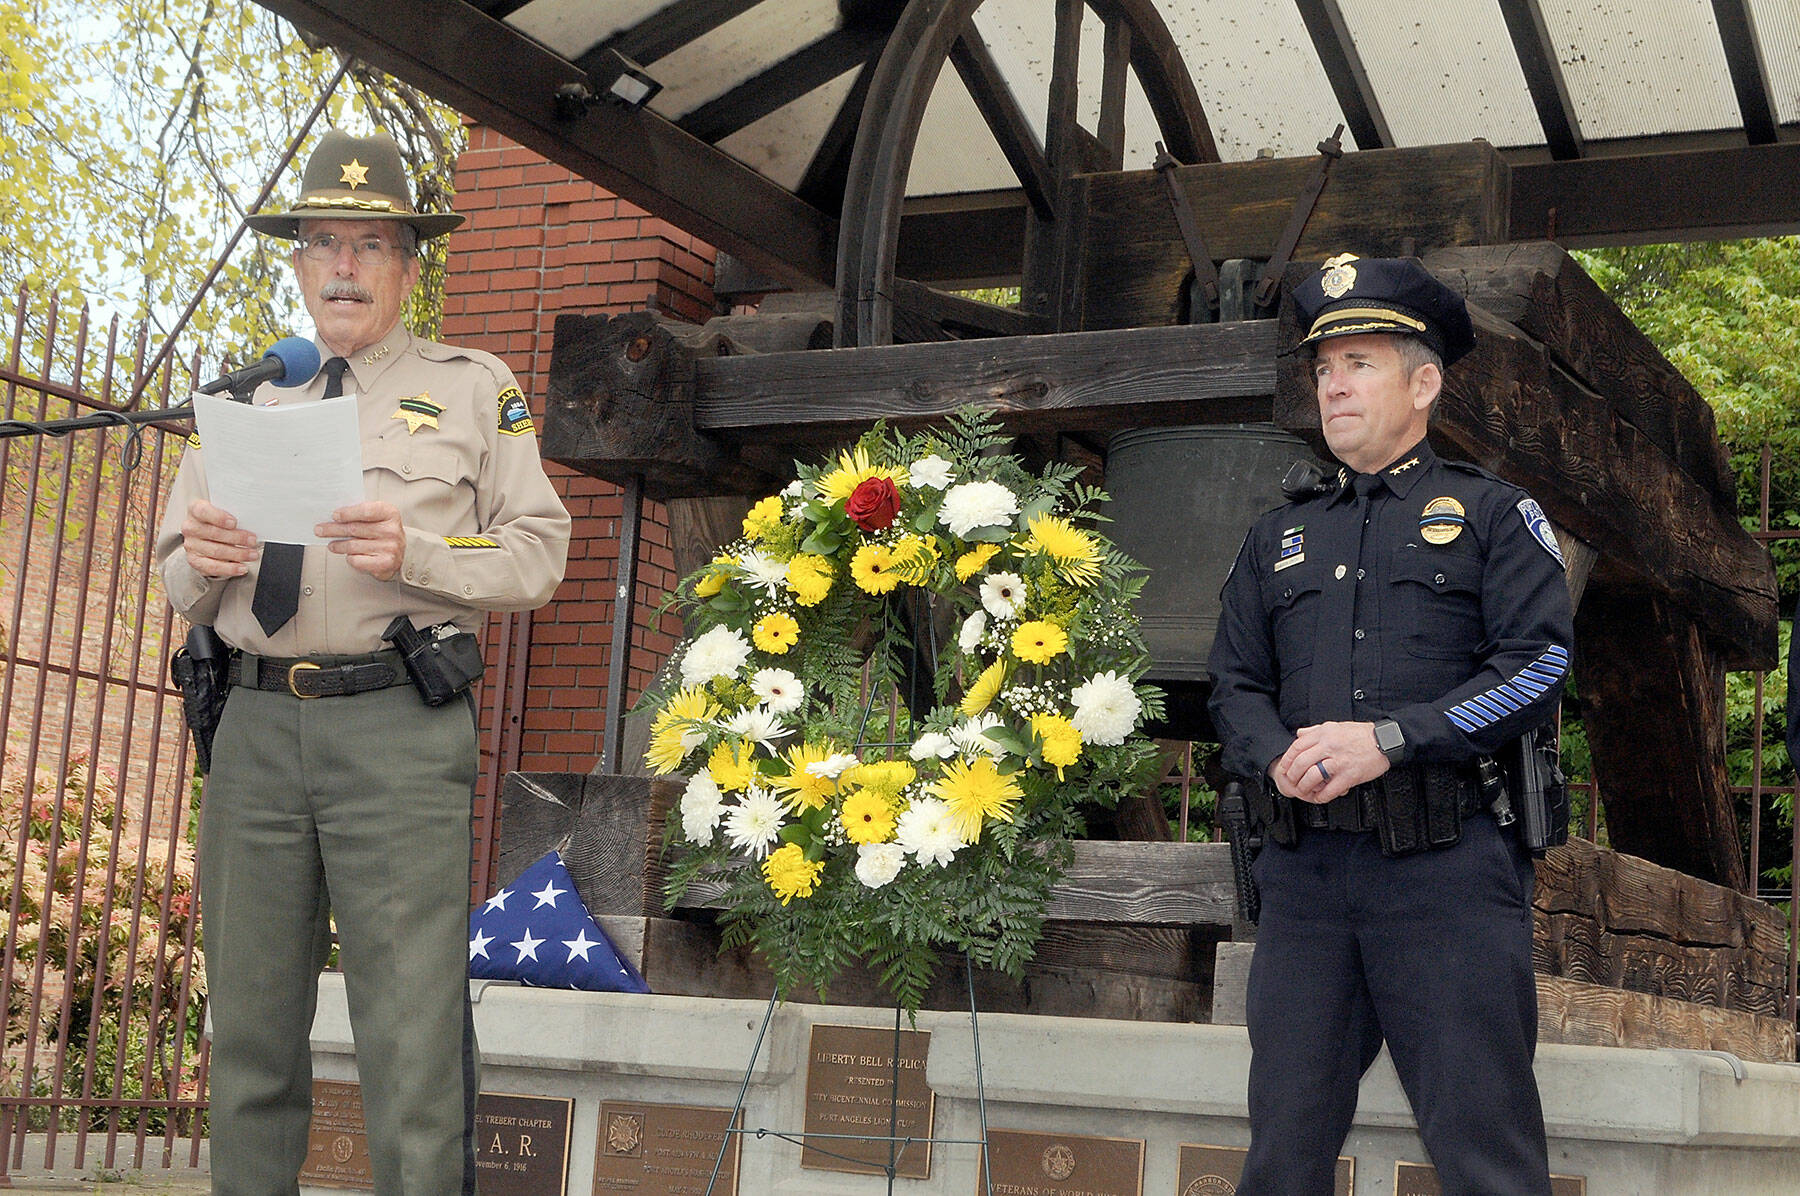 Clallam County Sheriff Bill Benedict, left, reads off the names of Washington law enforcment officers killed in the line of duty as Port Angeles Police Chief Brian Smith looks on during a ceremony of Friday honoring law enforcement personnel as part of National Police Week. (Keith Thorpe/Peninsula Daily News)